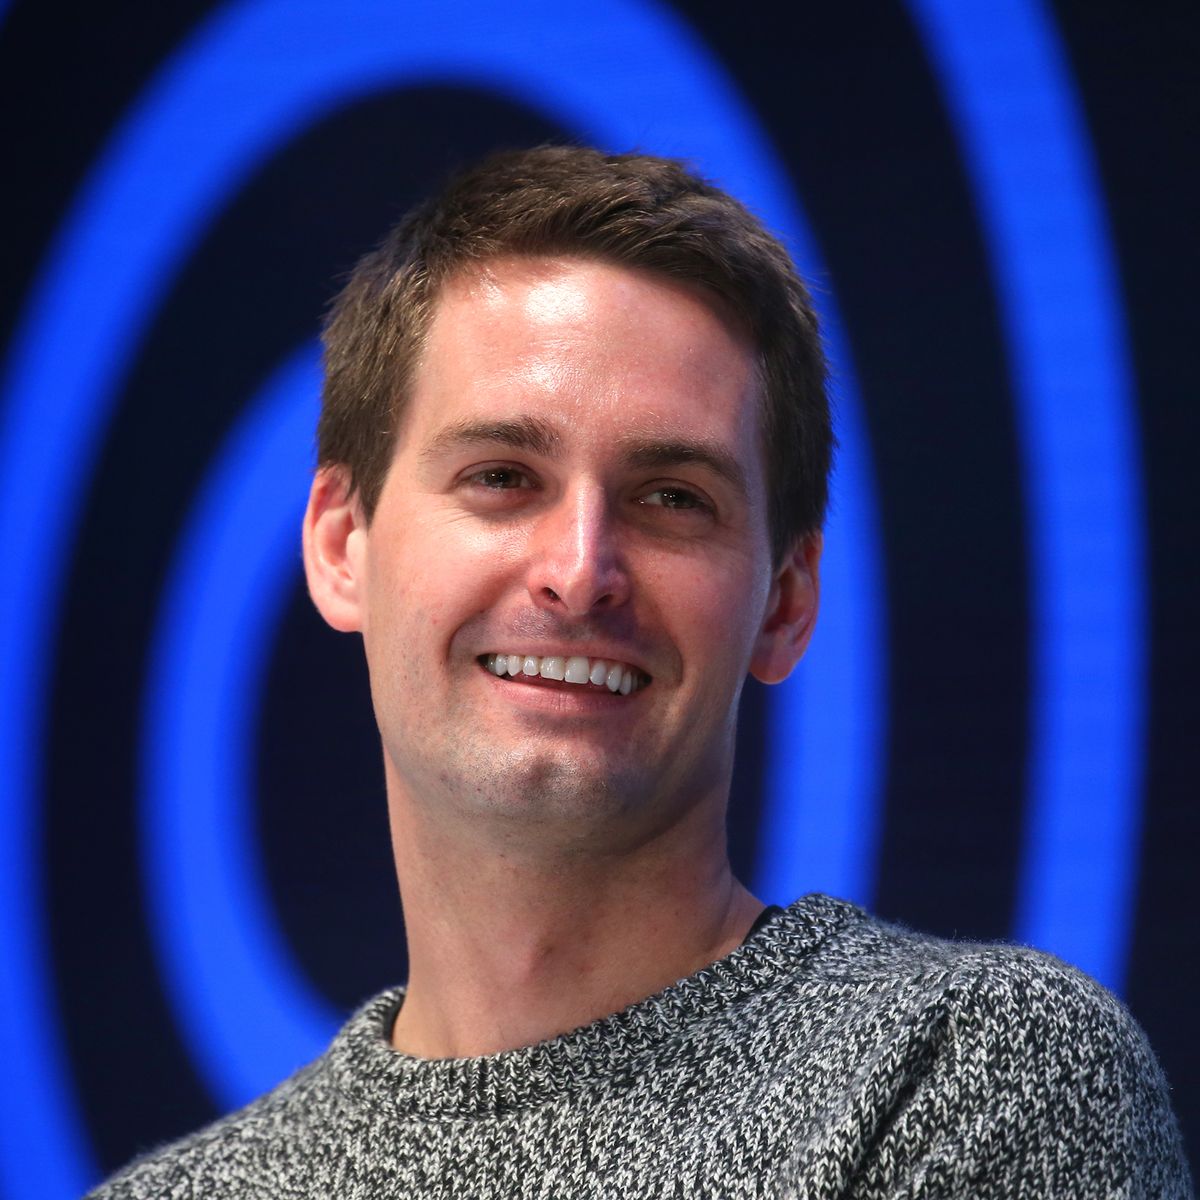 DLD Innovation Conference19 January 2020, Bavaria, Munich: Evan Spiegel, founder and CEO of Snap, sits on a panel discussion at the DLD (Digital Life Design) innovation conference. Topics of the conference are internet trends and developments in digitisation. Photo: Karl-Josef Hildenbrand/dpa (Photo by Karl-Josef Hildenbrand/picture alliance via Getty Images)